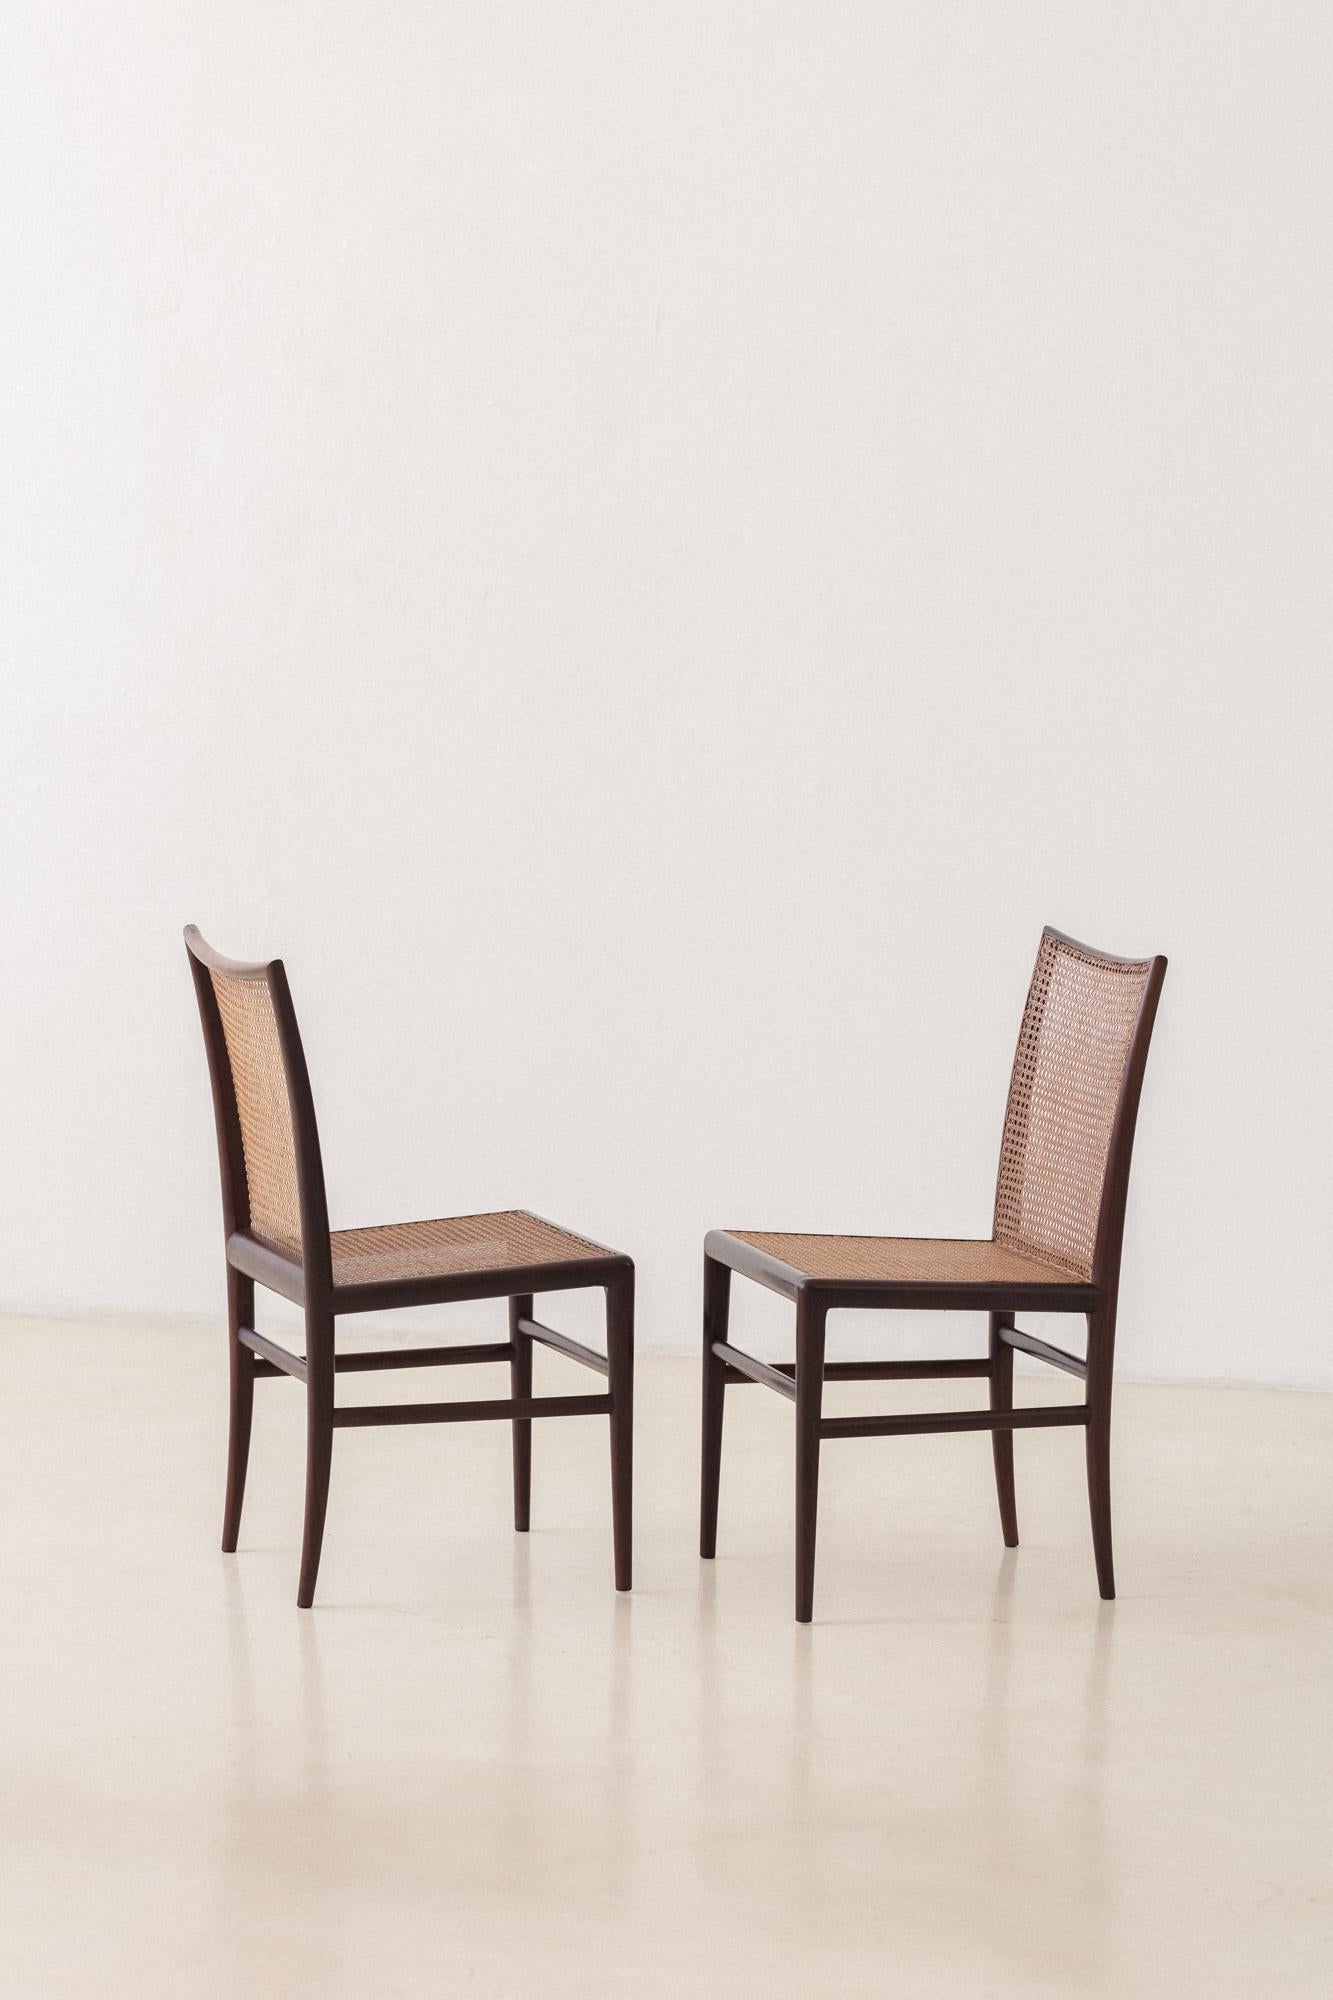 Set of 8 Rosewood Cane Chairs, Branco & Preto, 1952, Brazilian Midcentury In Good Condition For Sale In New York, NY